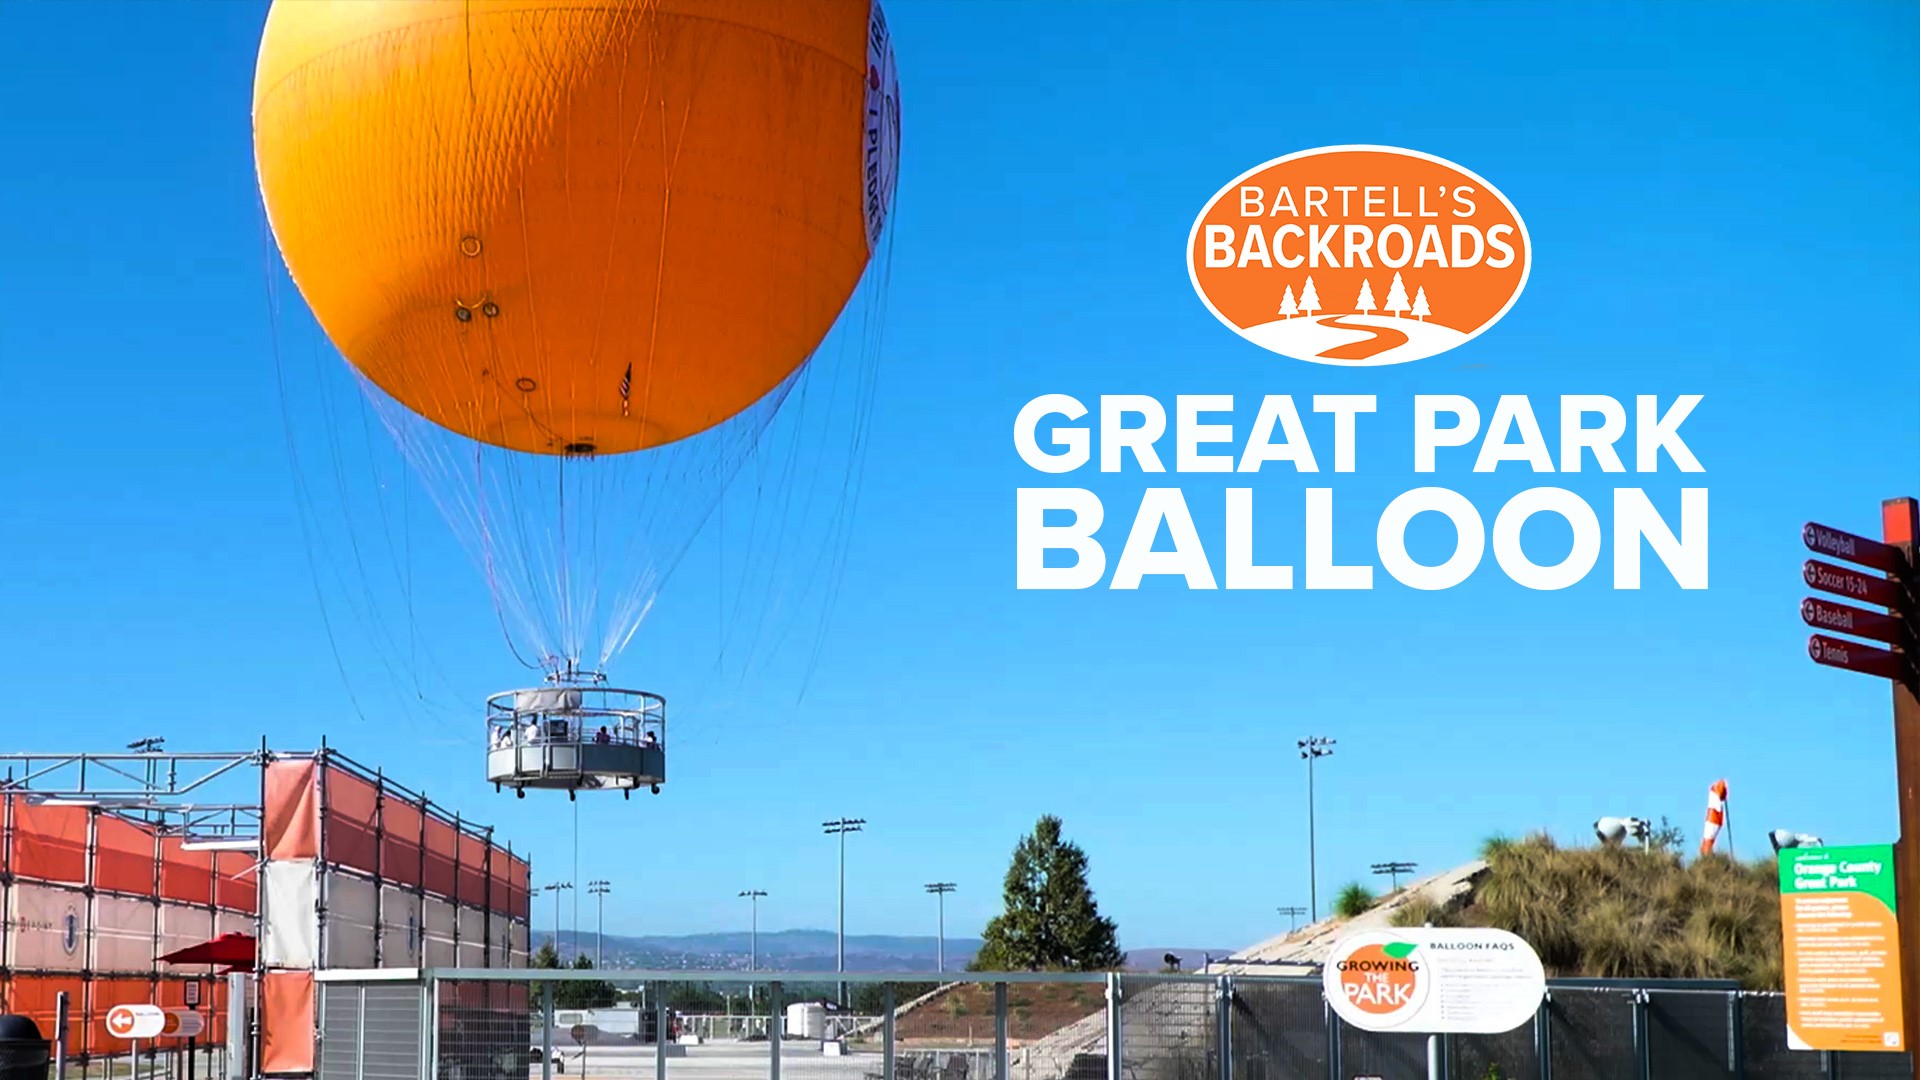 Gigantic tethered helium balloon offers free rides high above Orange County at historic Marine Corps air base-turned-park.